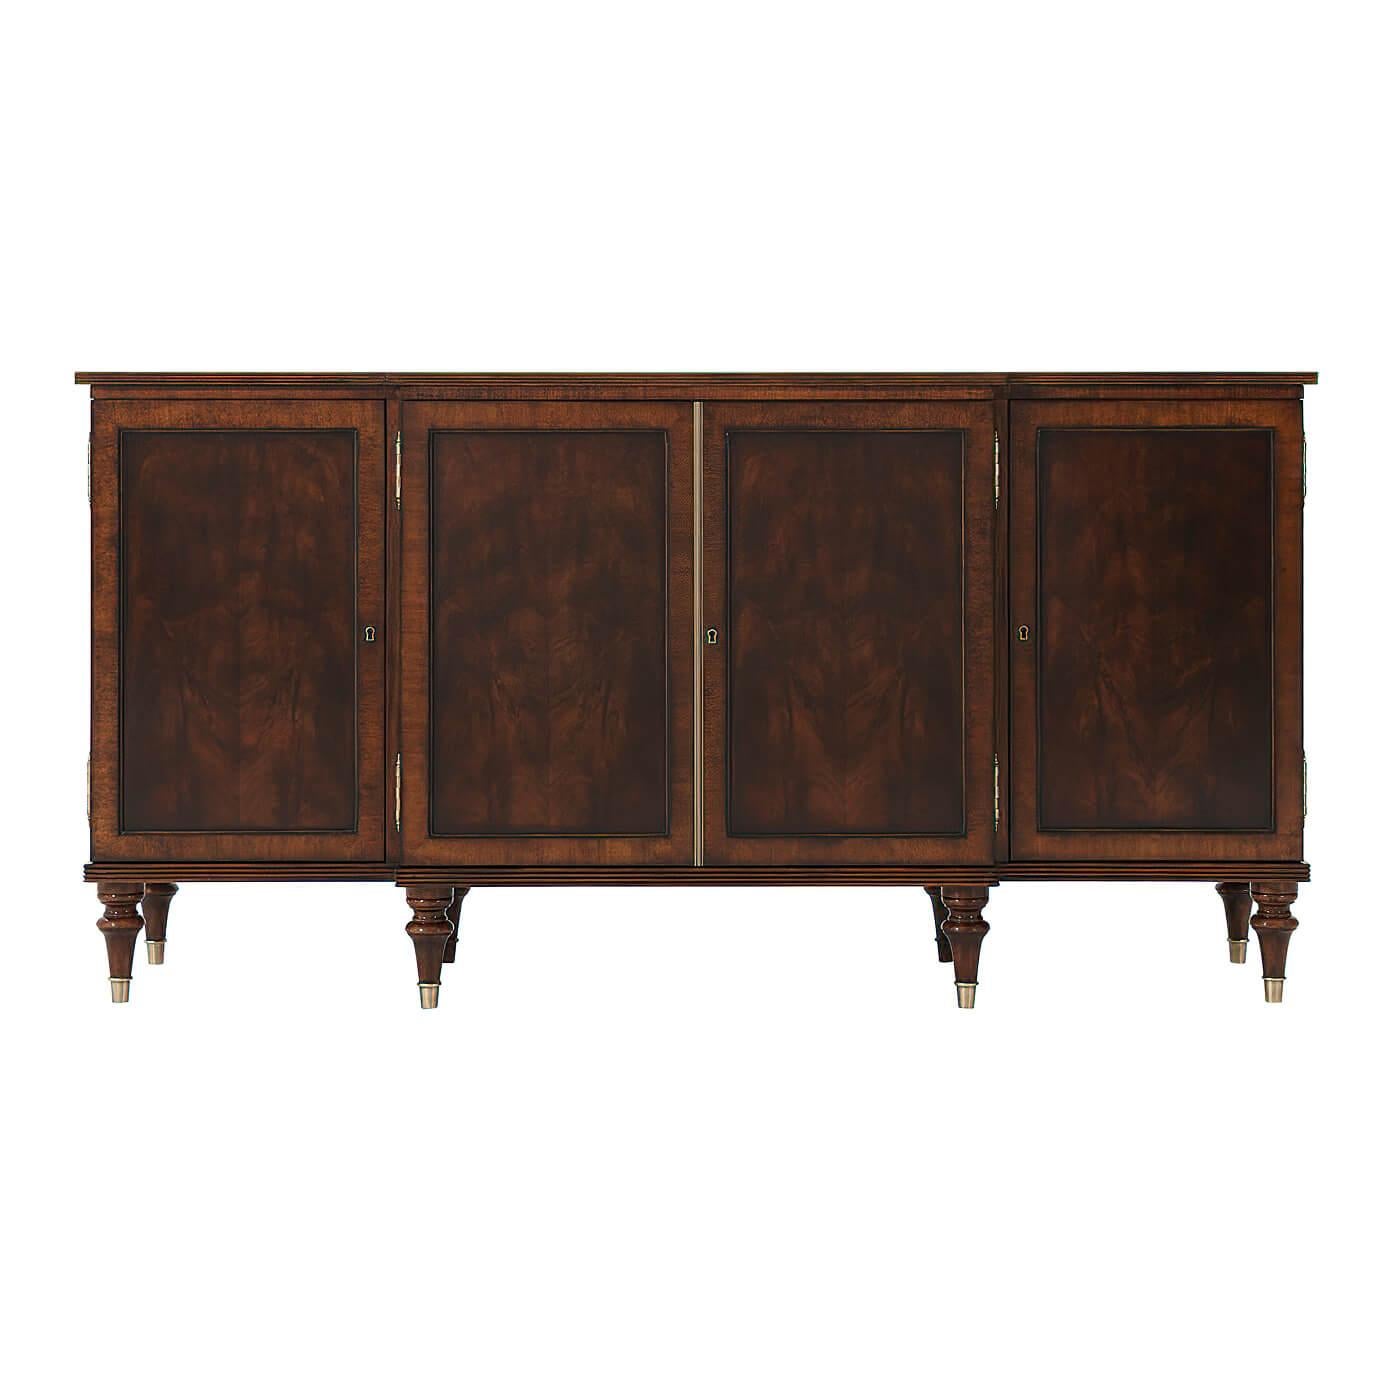 A Regency style swirl mahogany veneered and satinwood crossbanded side cabinet, the breakfront reeded edge top above four doors, the central doors enclosing two drawers and an adjustable shelf, the side doors each enclosing adjustable shelves, on